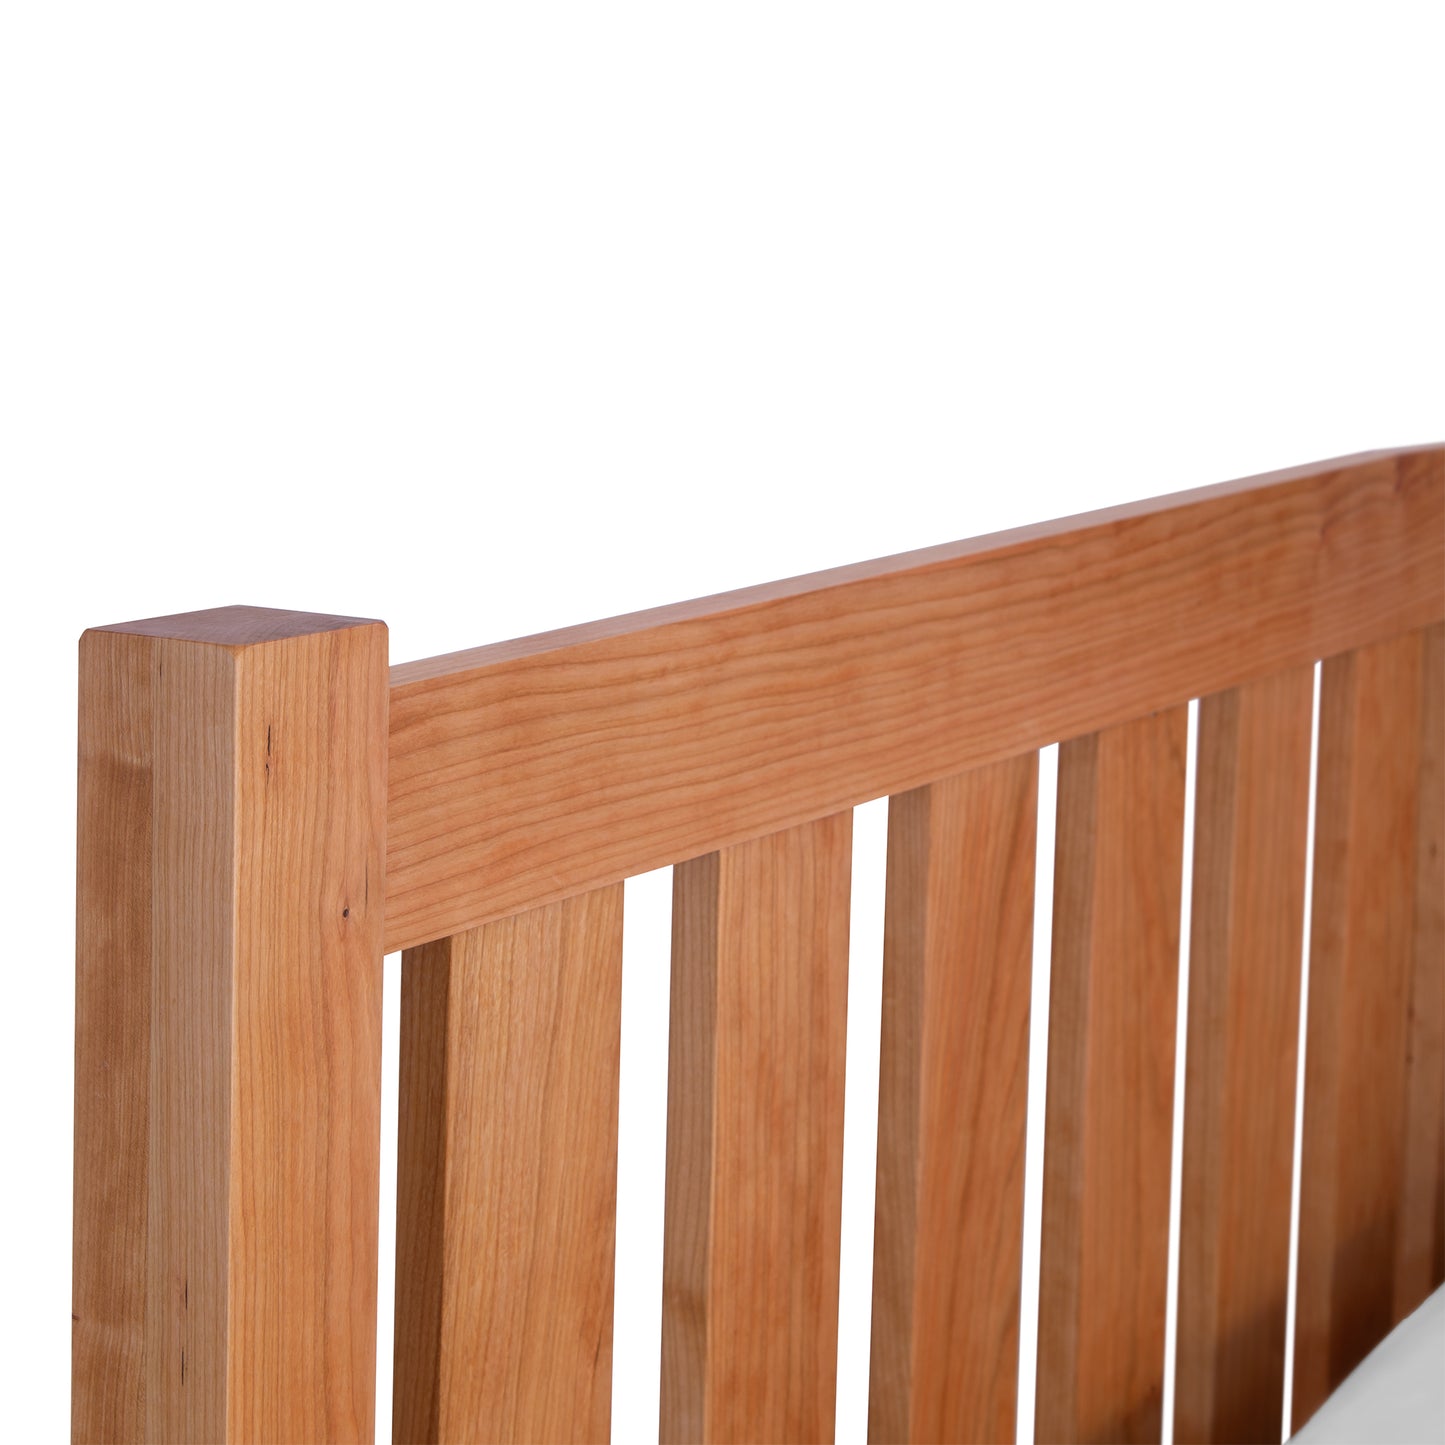 Part of a Vermont Furniture Designs Bennington Bed with Low Footboard, made of cherry walnut wood slats, isolated on a white background.